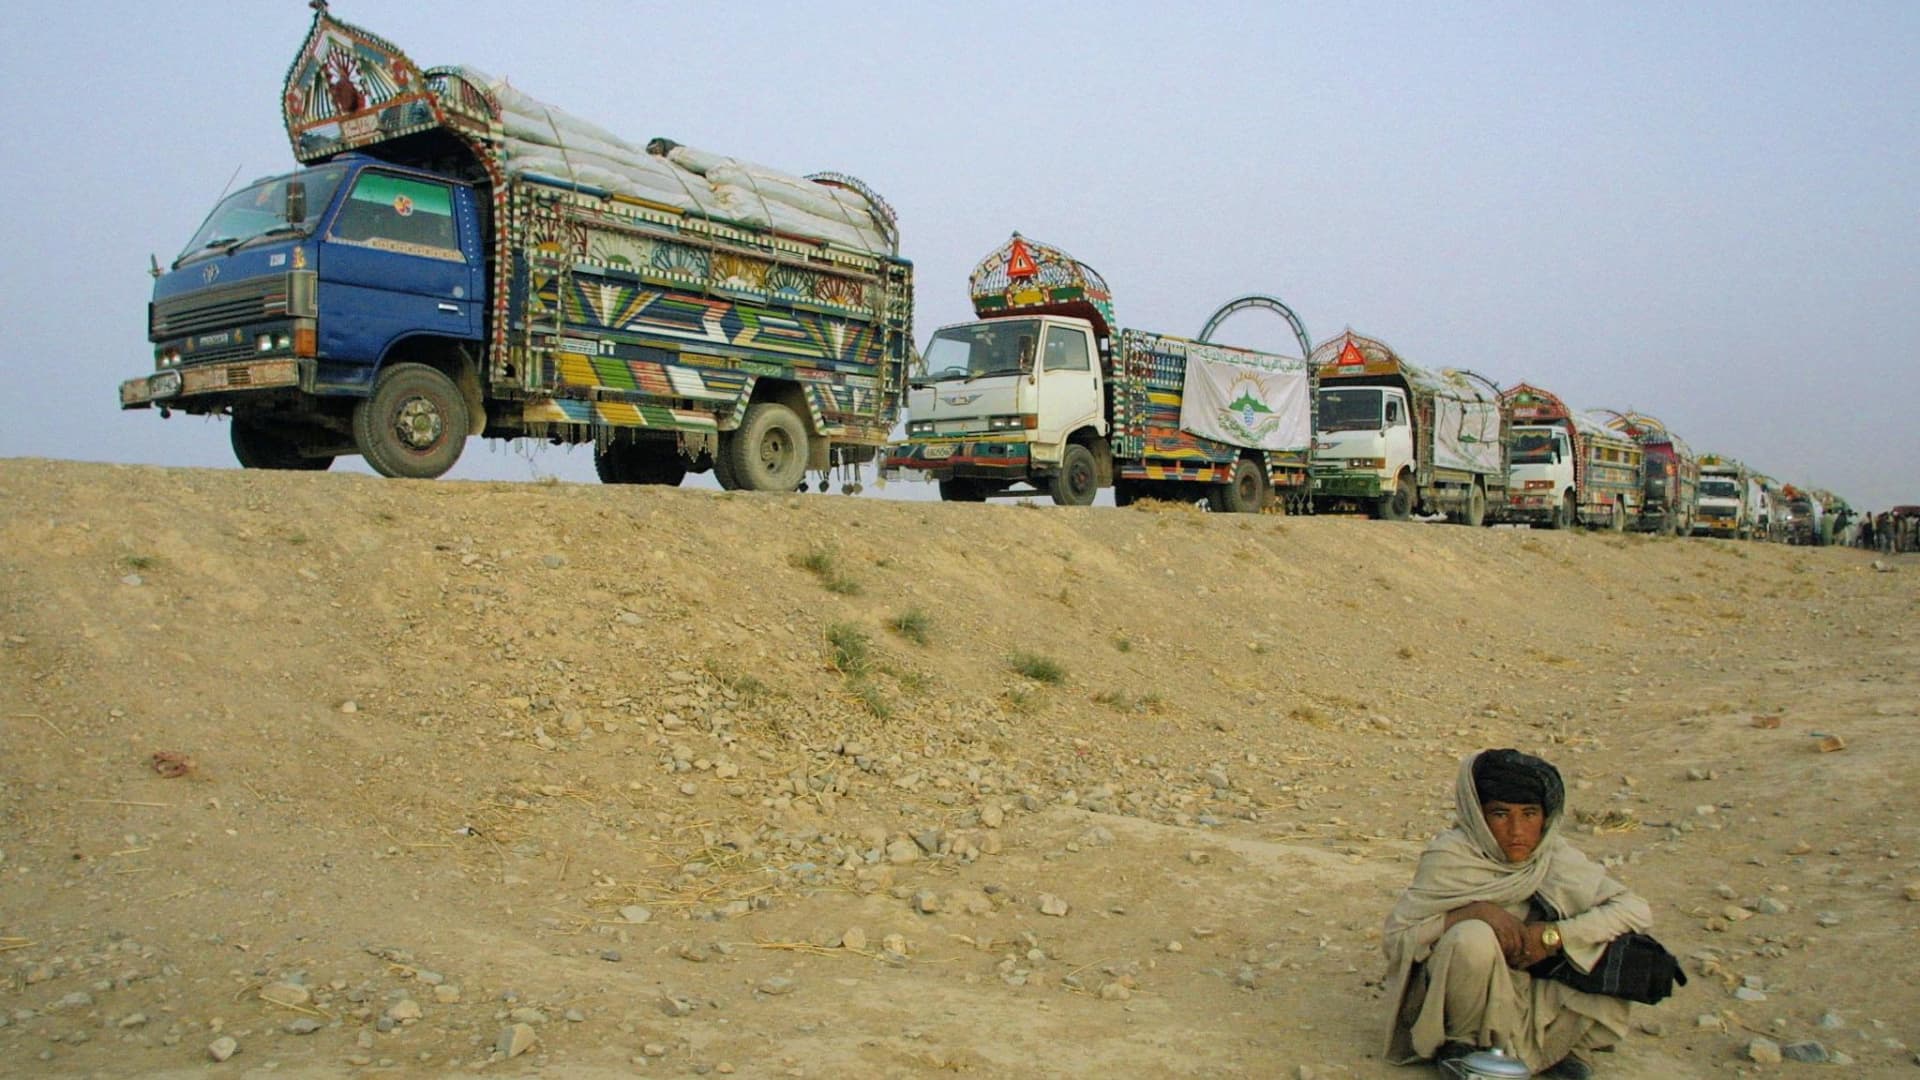 A boy squats near a convoy of 30 trucks parked on the side of a road in Quetta, at dusk 03 November 2001 just before they leave for Kandahar, Afghanistan.